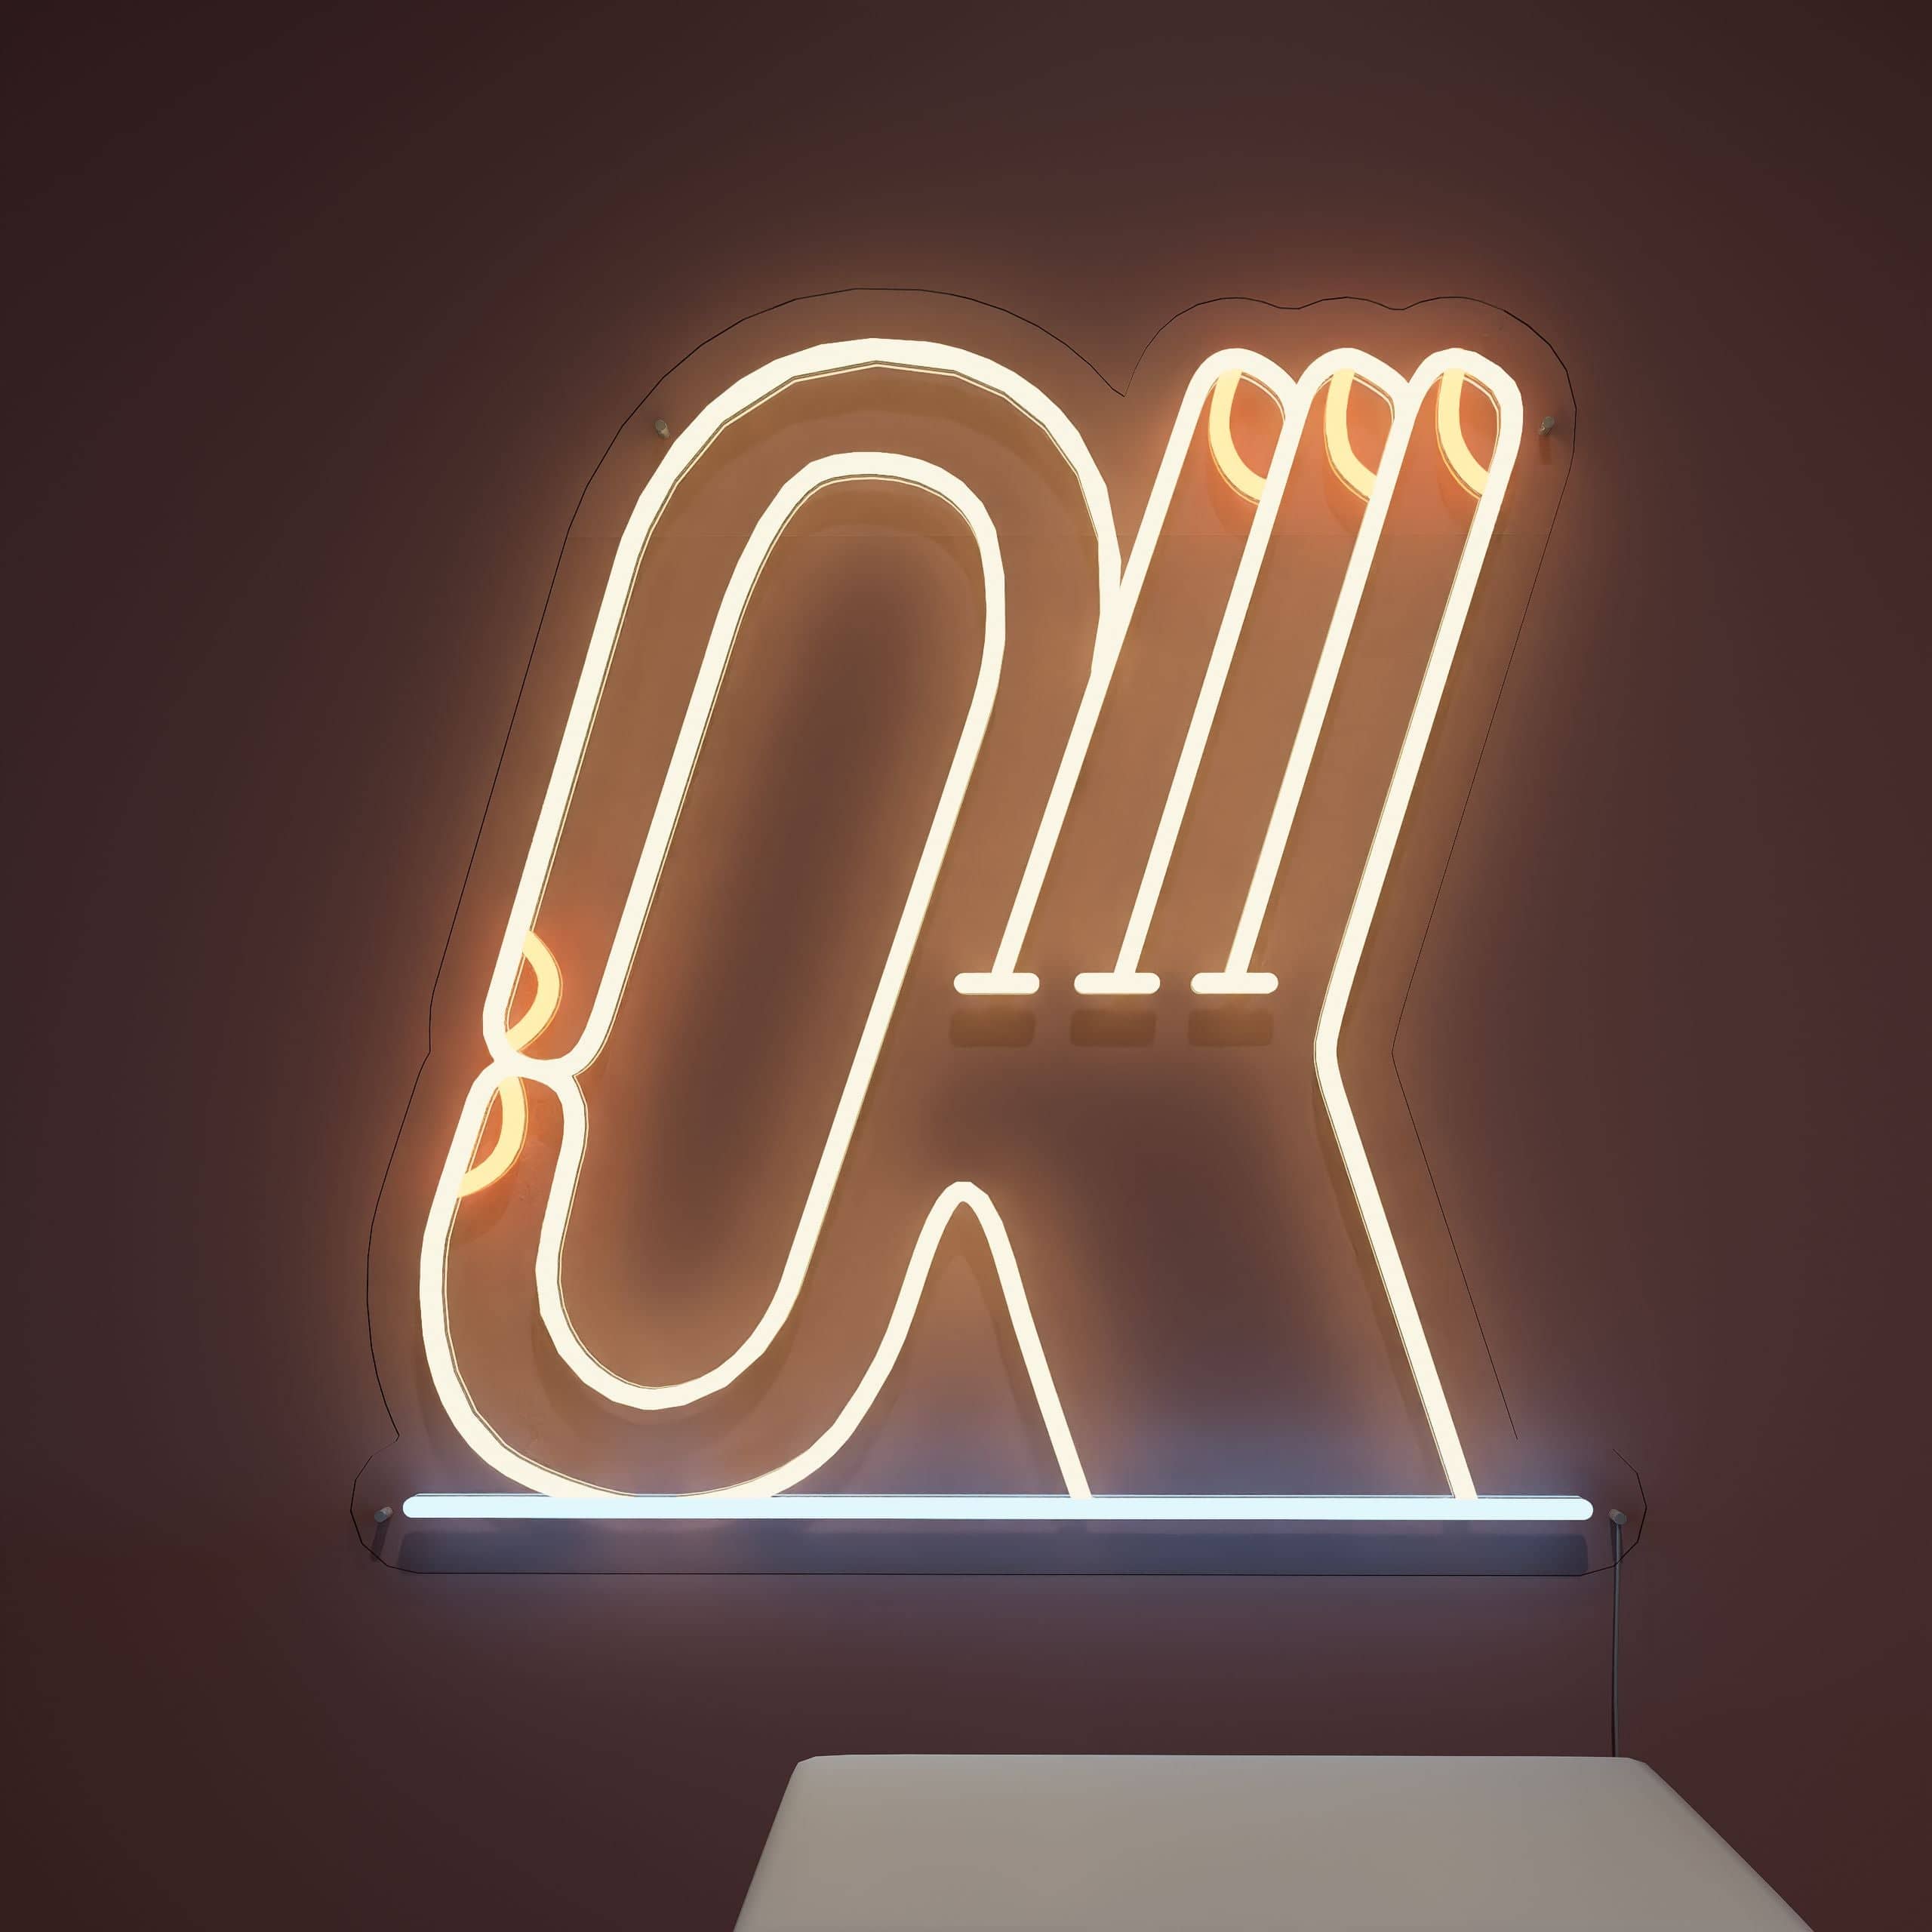 Make spaces shine with awesome It's OK neon light